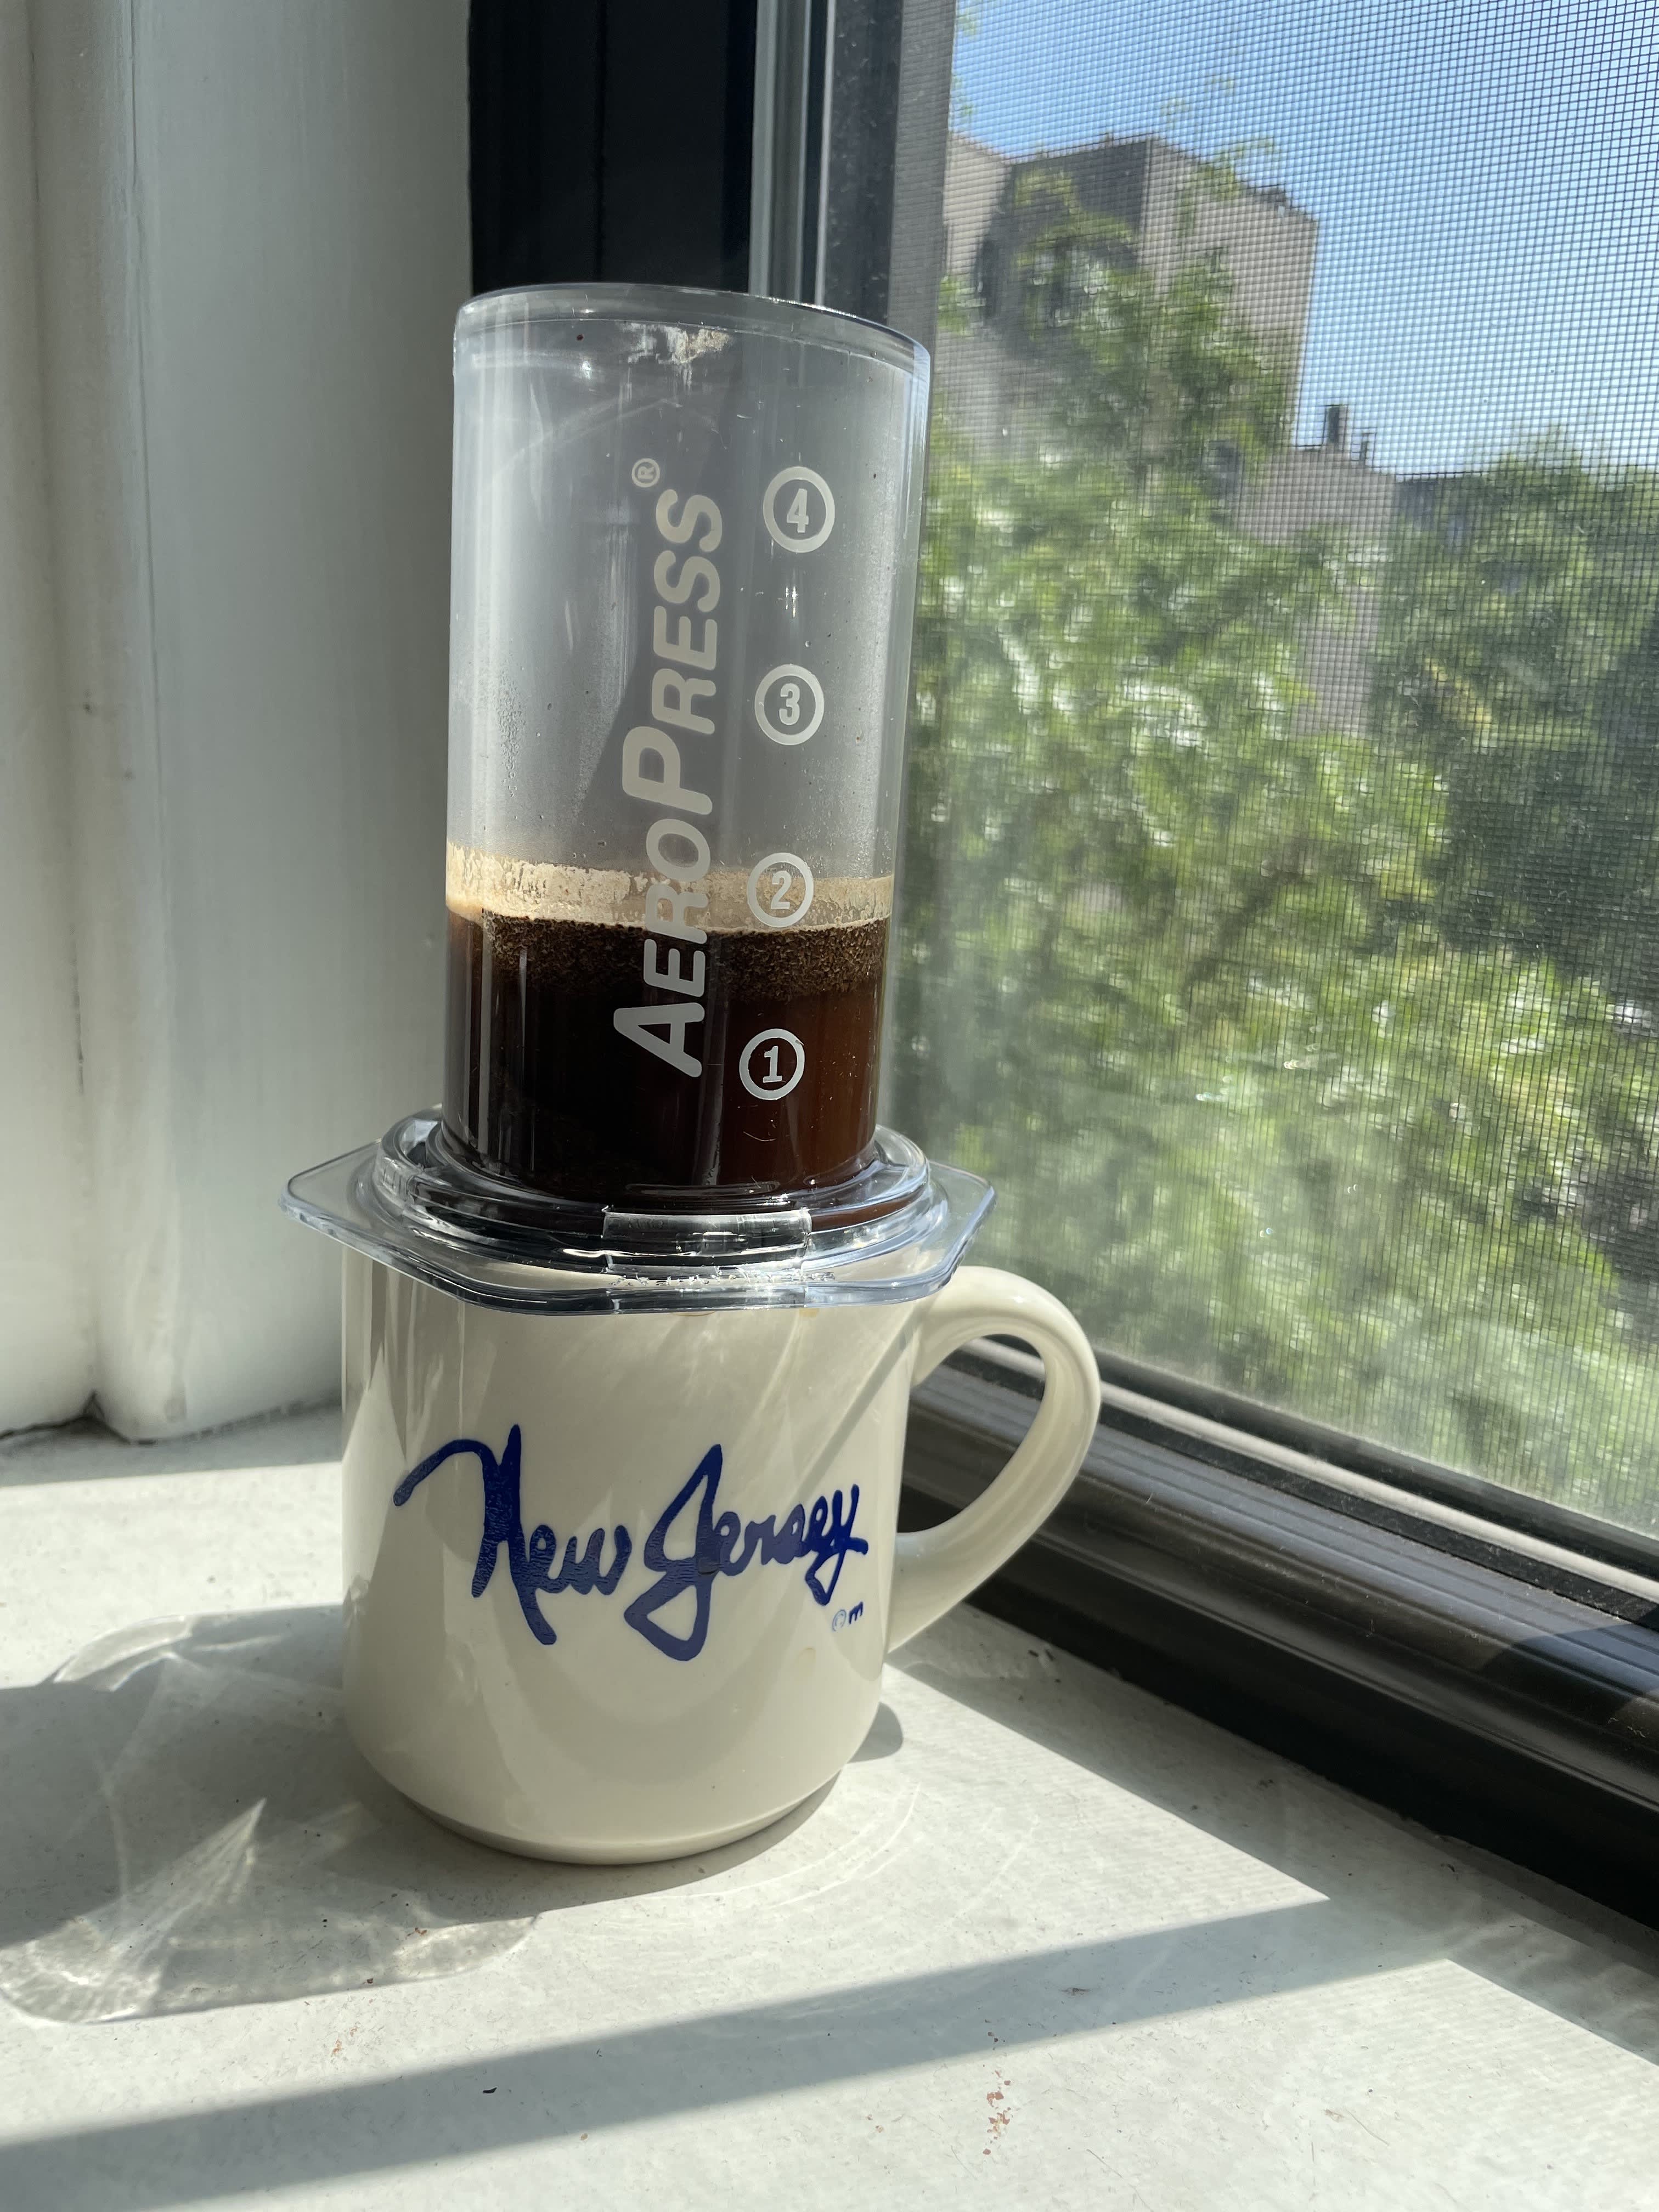 Aeropress Clear Coffee Press – 3 in 1 brew method combines French Press,  Pourover, Espresso - Full bodied coffee without grit or bitterness - Small